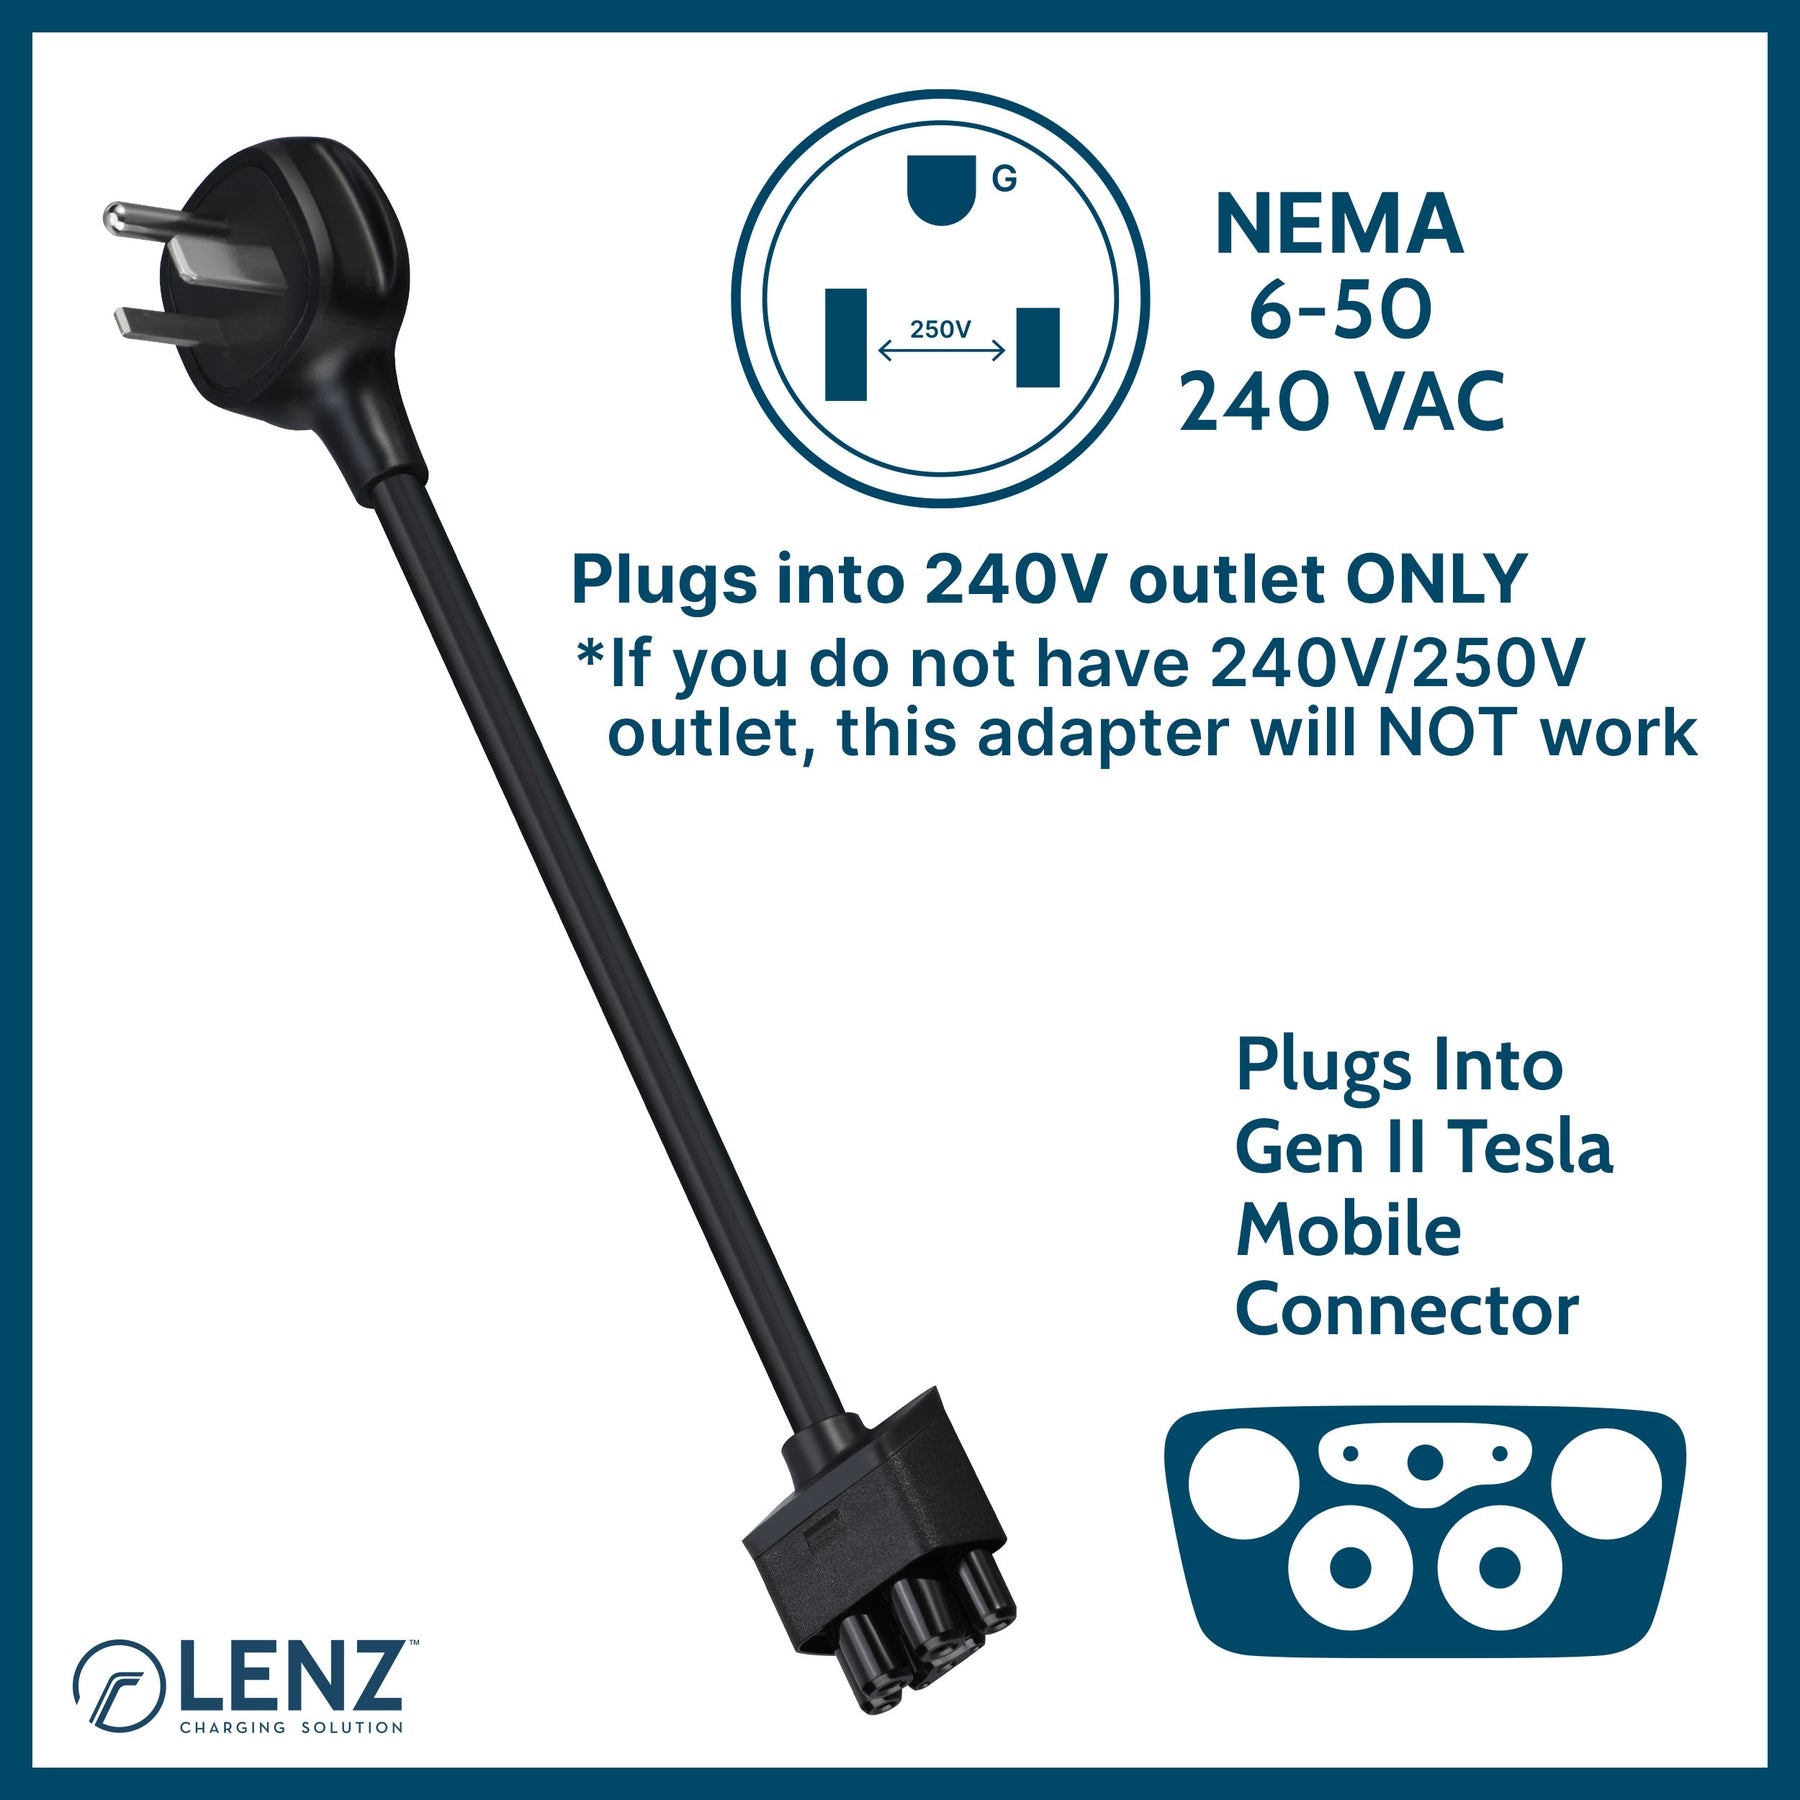 LENZ 6-50 NEMA Adapter plugs into 240v 6-50 type outlet and connects to Gen 2 Tesla Mobile Connector